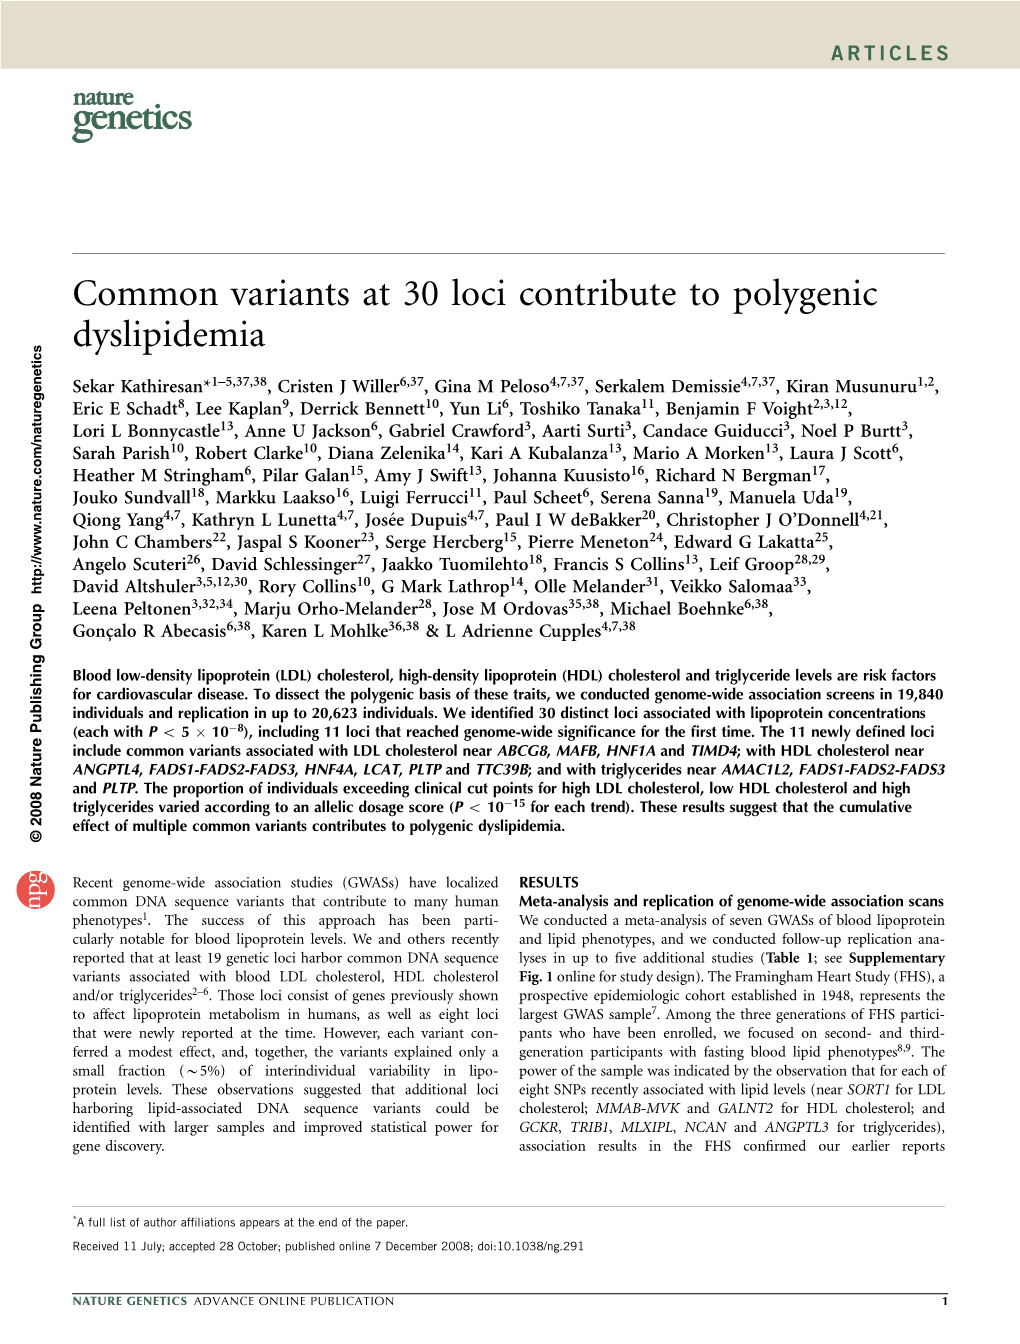 Common Variants at 30 Loci Contribute to Polygenic Dyslipidemia